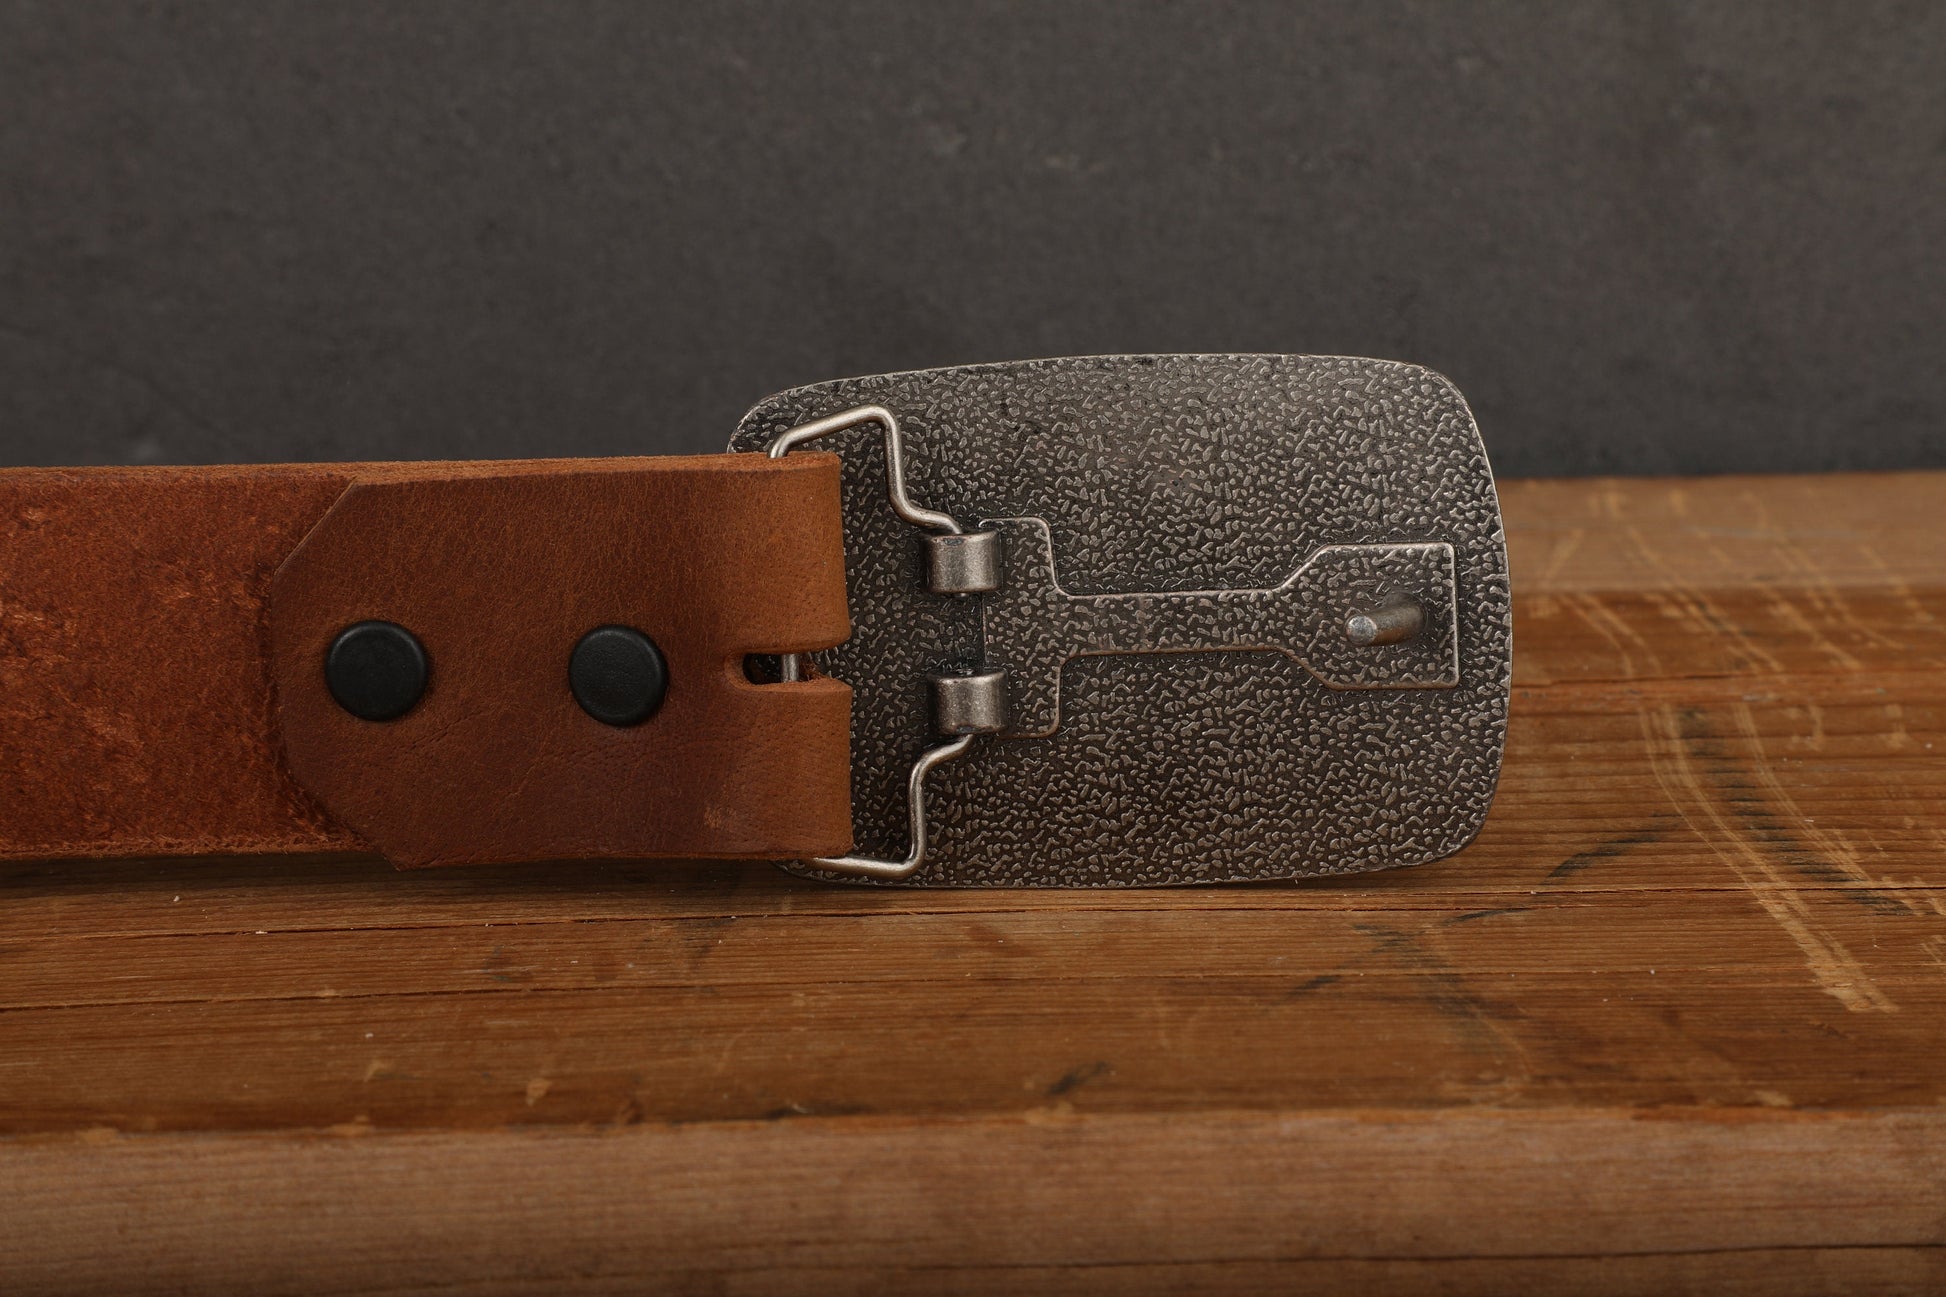 a leather belt with a metal buckle on a wooden surface